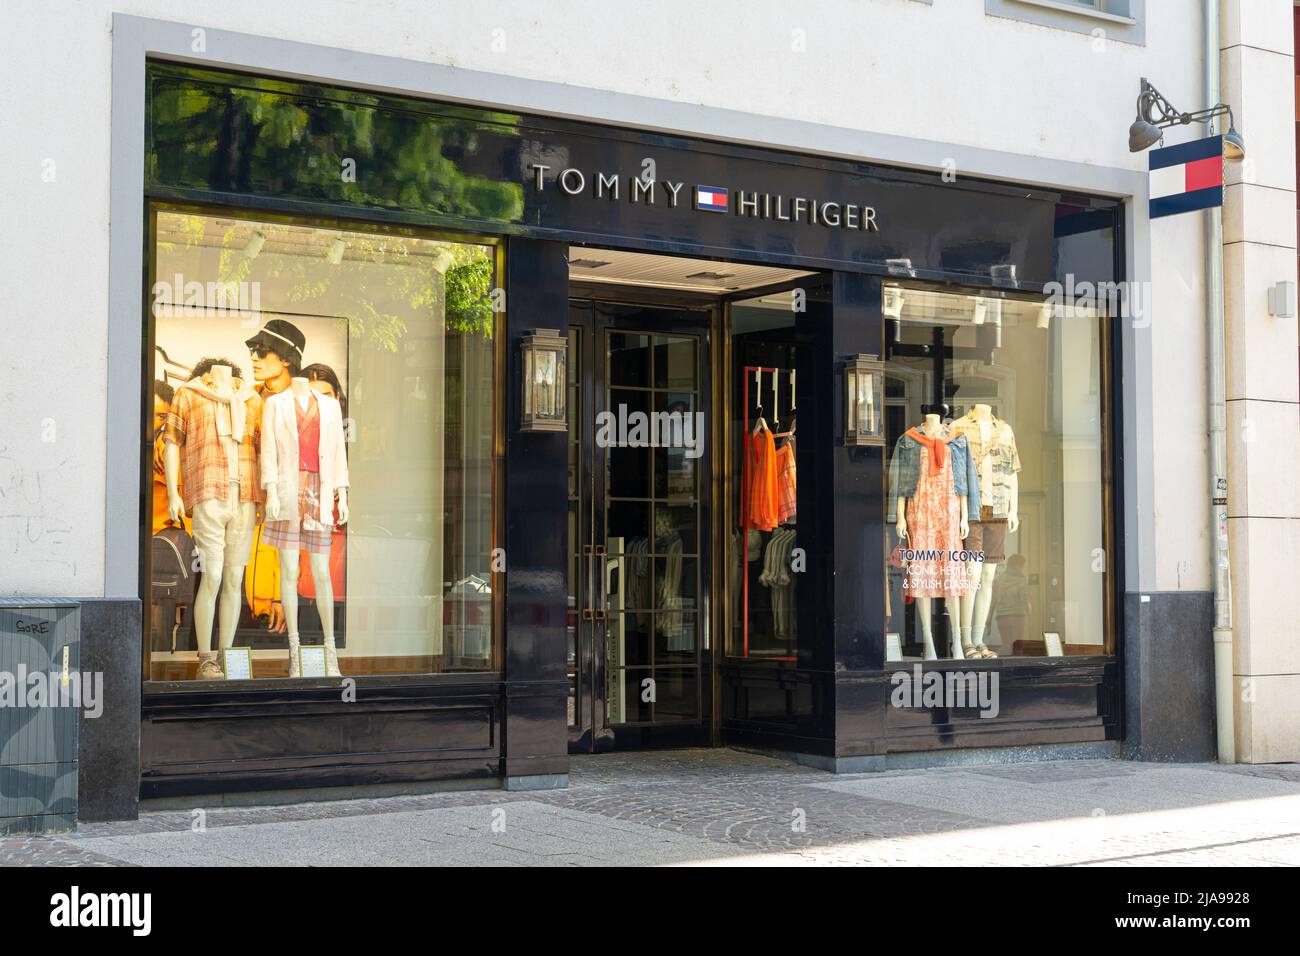 Tommy Hilfiger Outlet Store Outlet High Resolution Stock Photography and  Images - Alamy